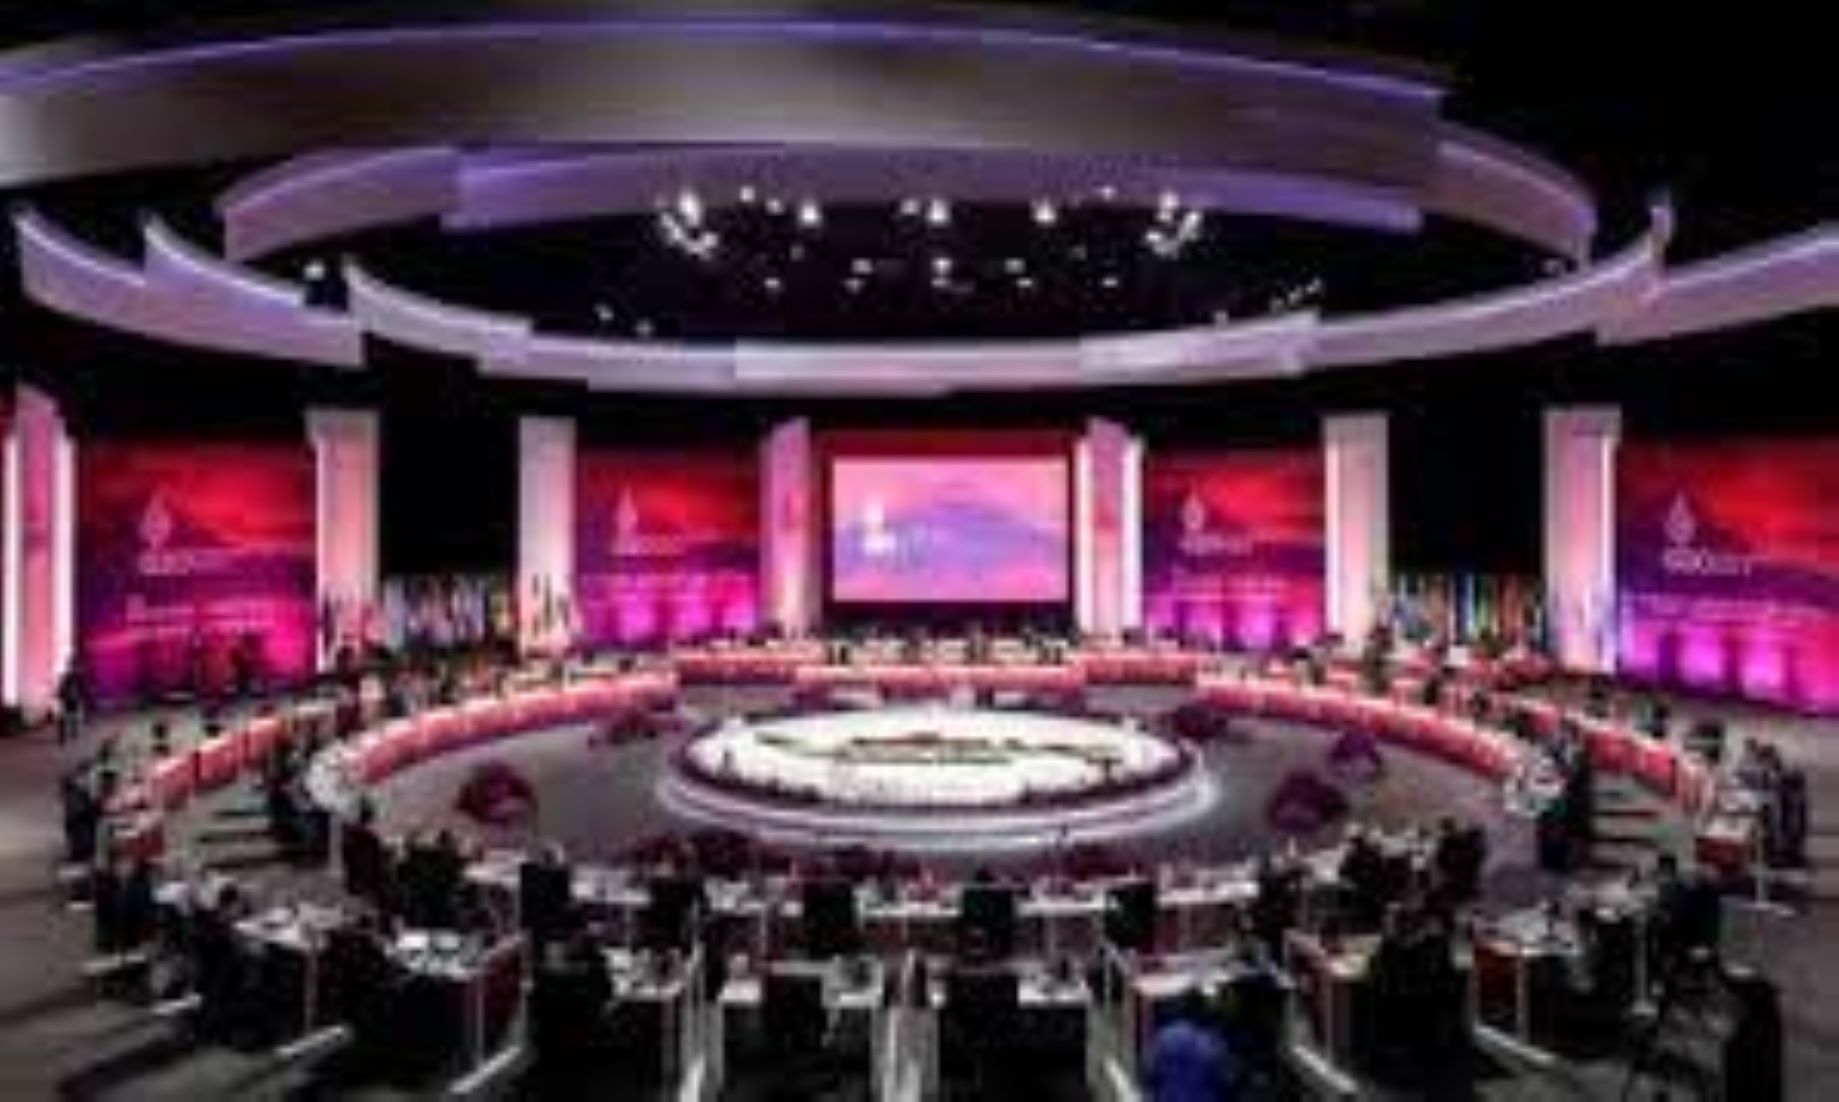 Indonesia Called For Global Fund At G20 Meeting To Develop Cultural Economy